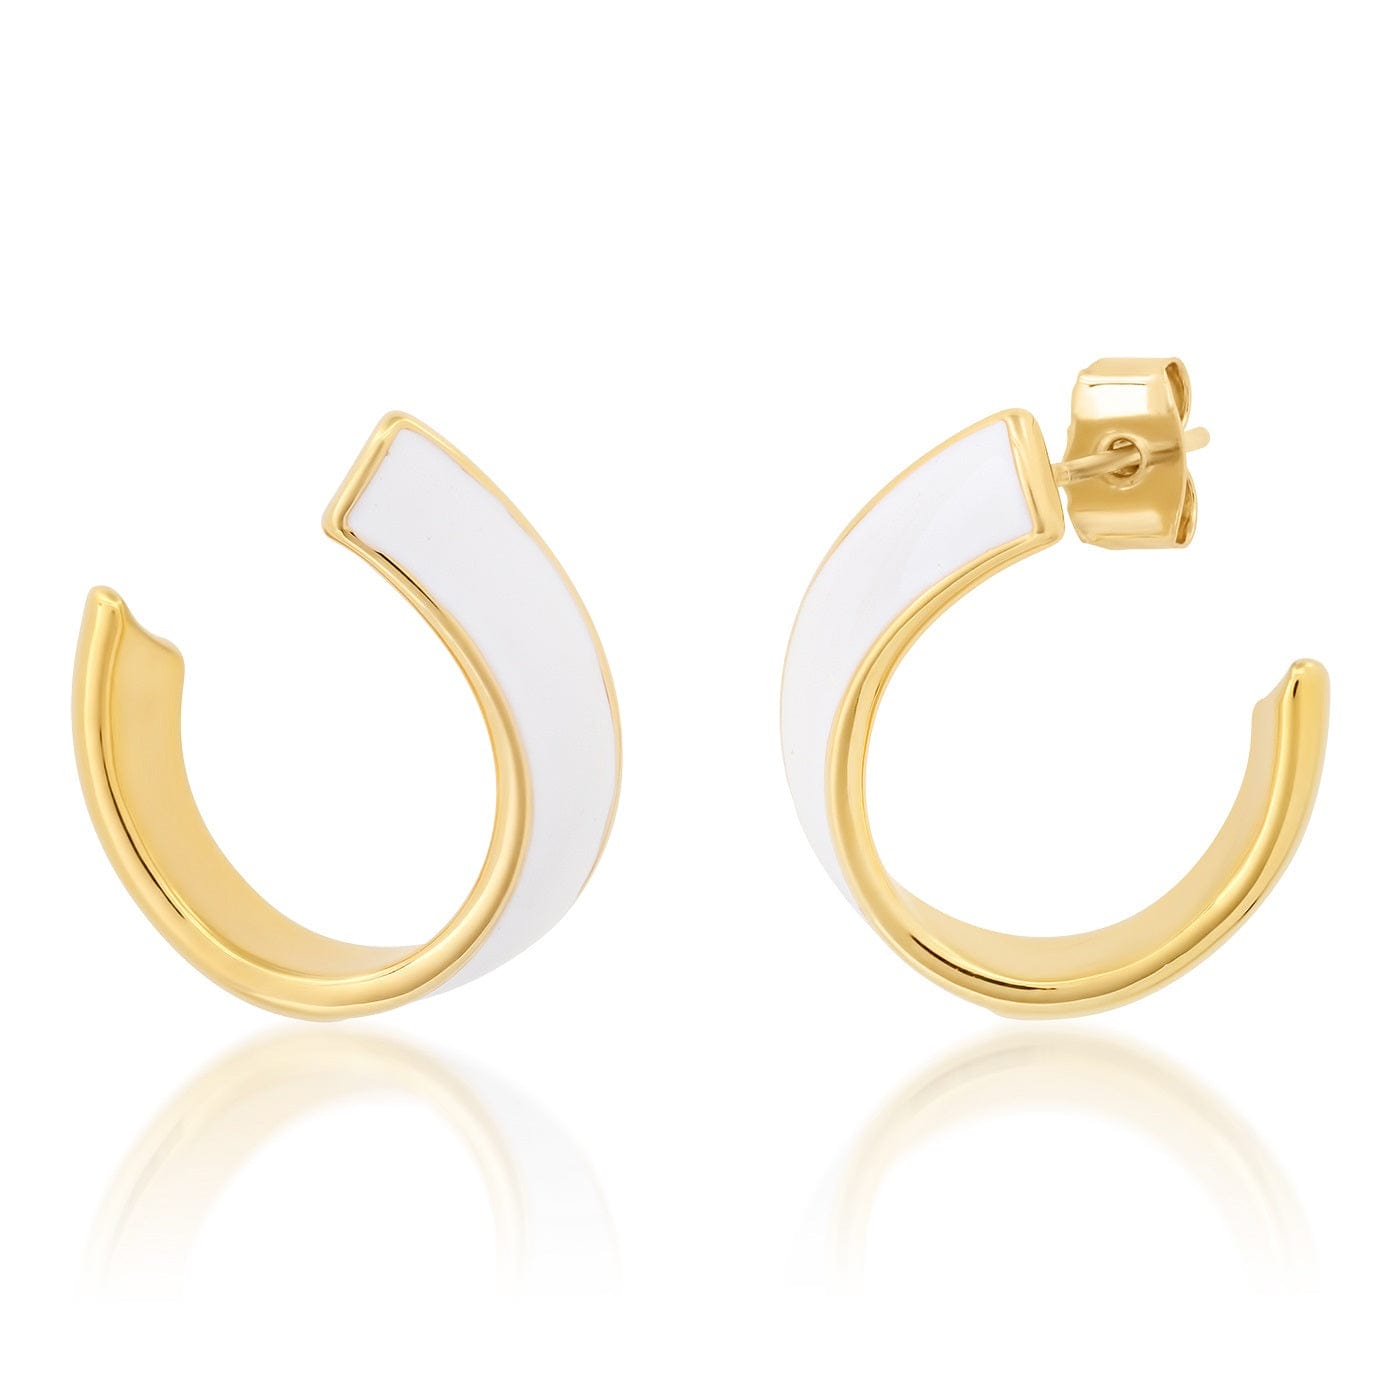 TAI JEWELRY Earrings Gold and Enamel Front Facing Hoop